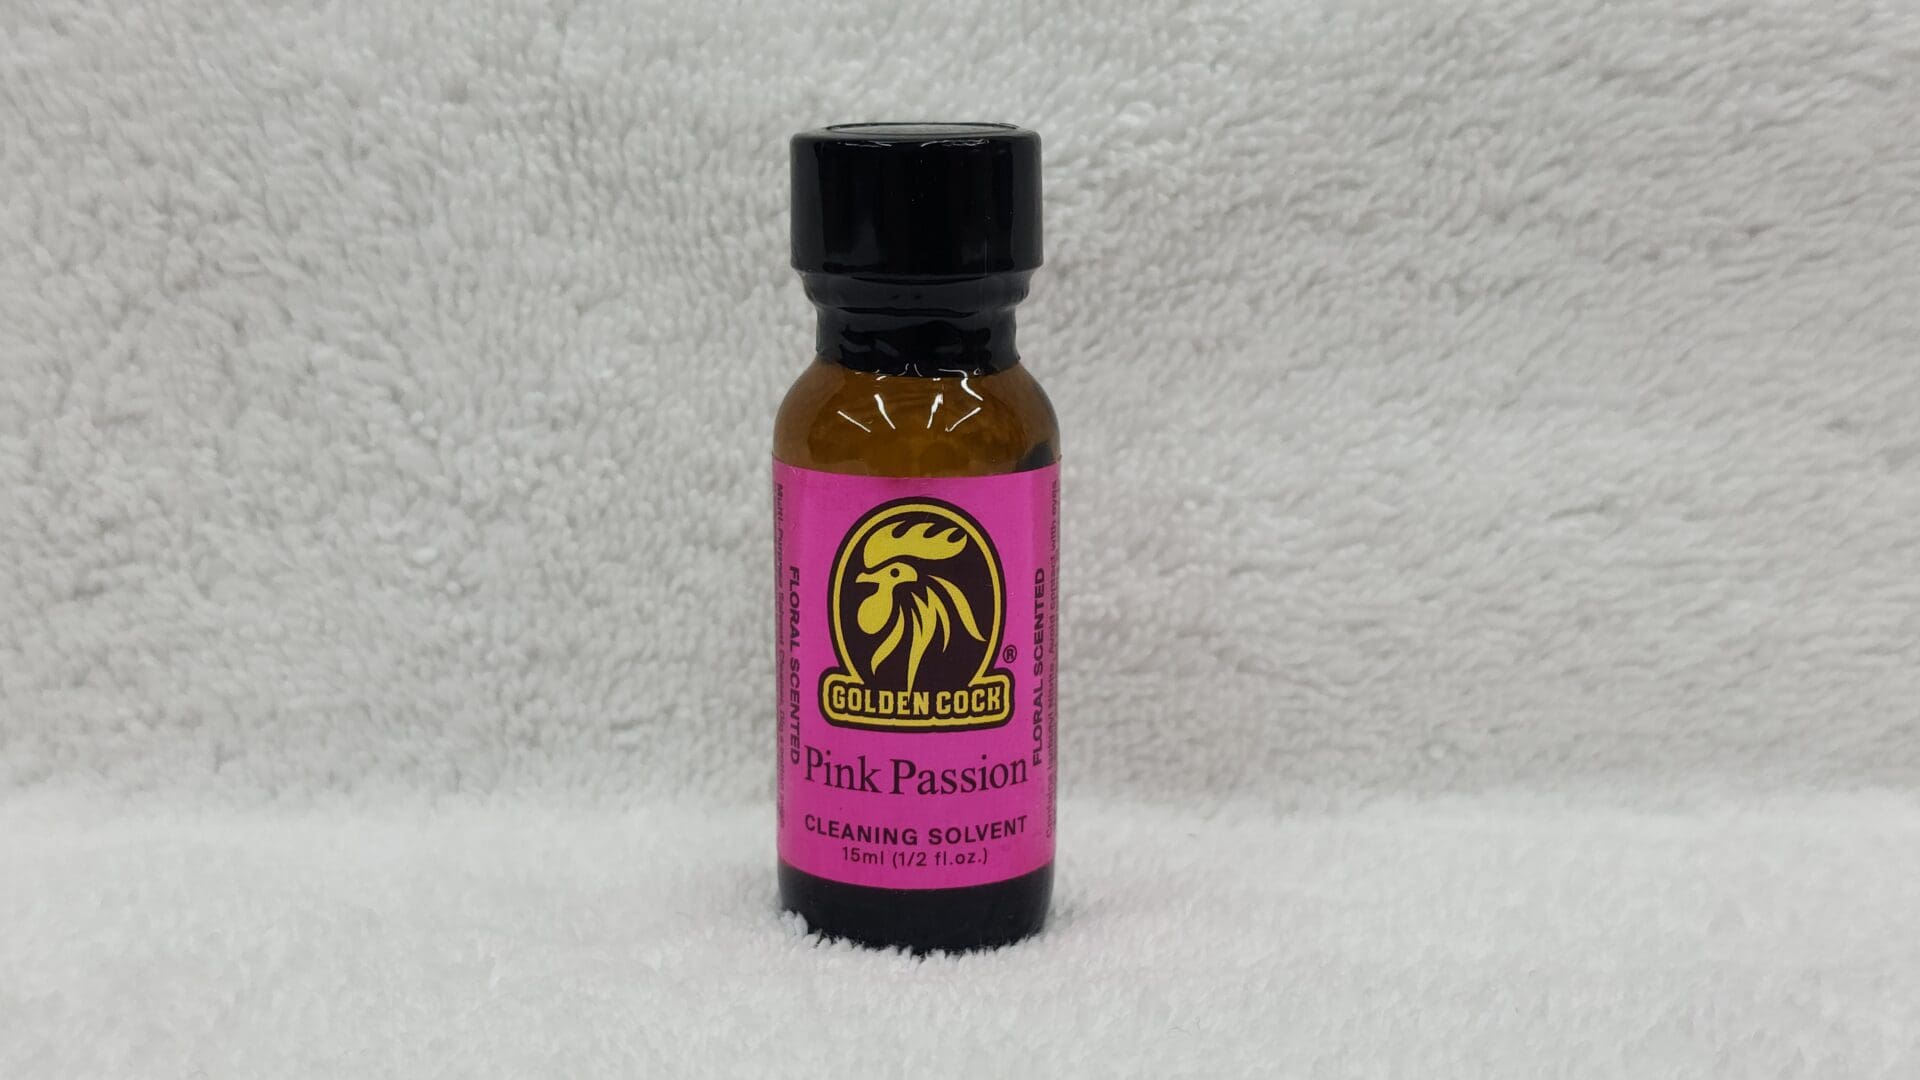 A bottle labeled "Golden Cock Pink Passion" (1 fl oz) on a white towel background.